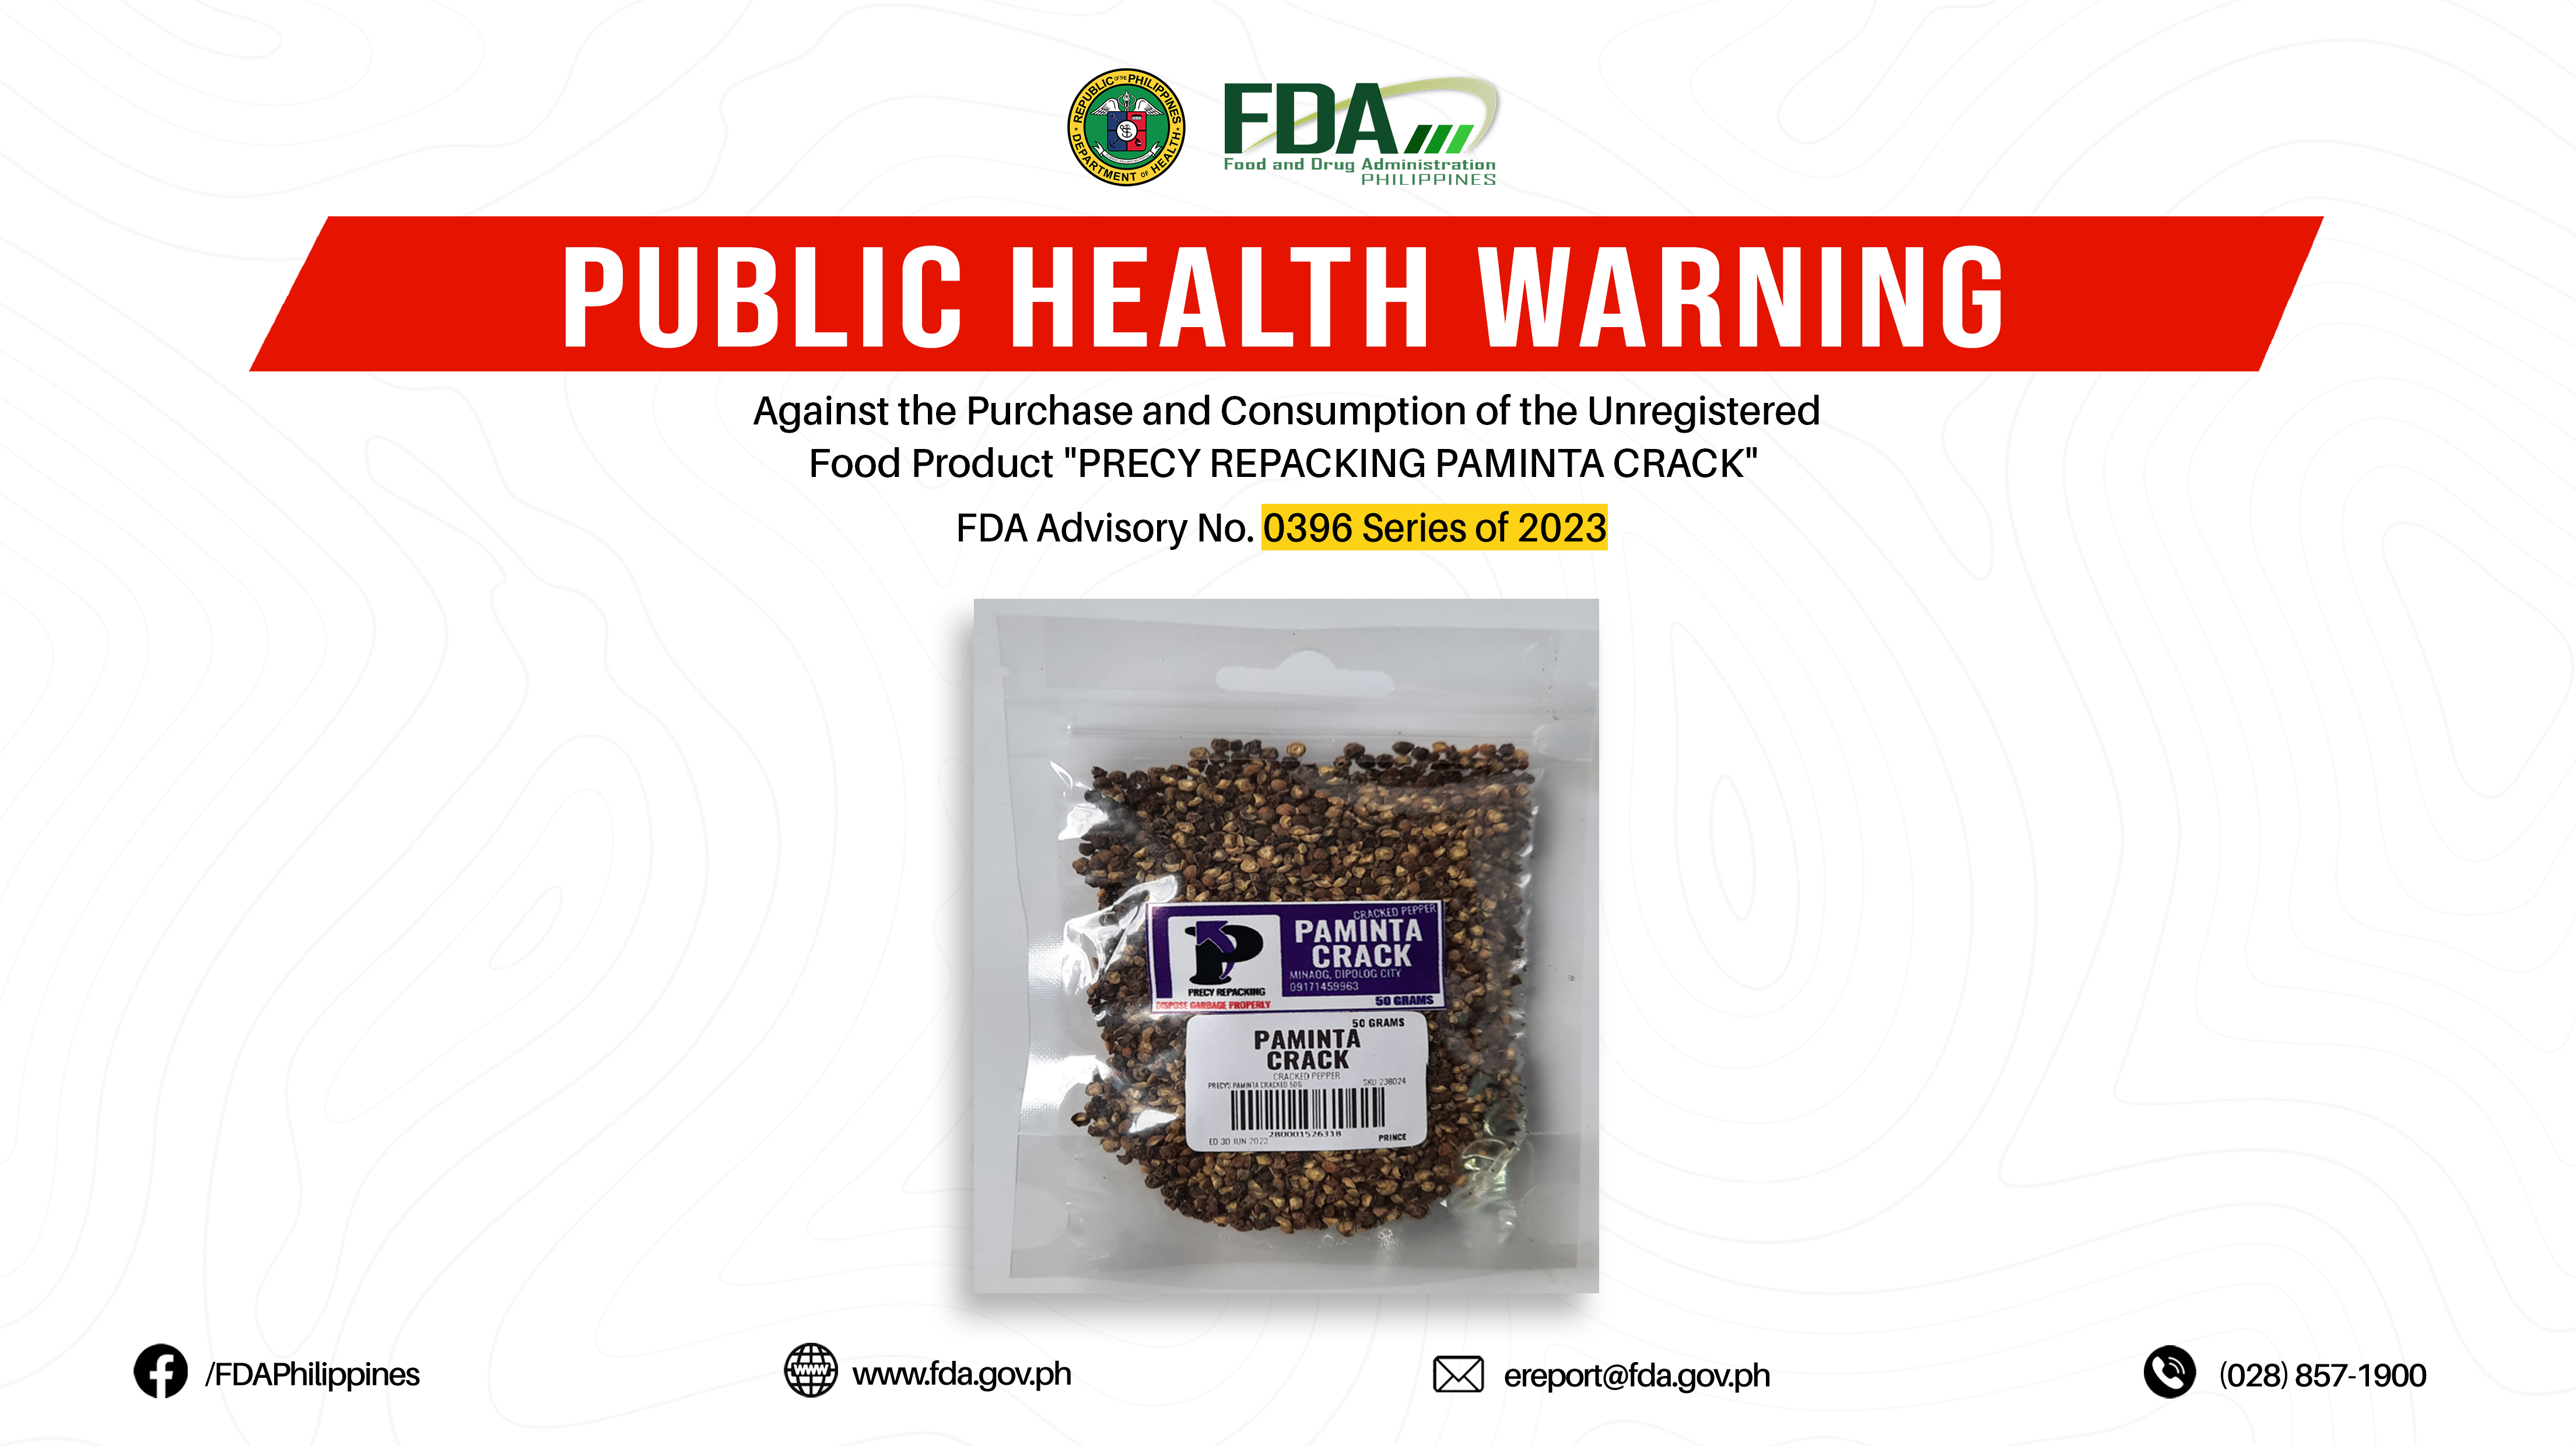 FDA Advisory No.2023-0396 || Public Health Warning Against the Purchase and Consumption of the Unregistered Food Product “PRECY REPACKING PAMINTA CRACK”